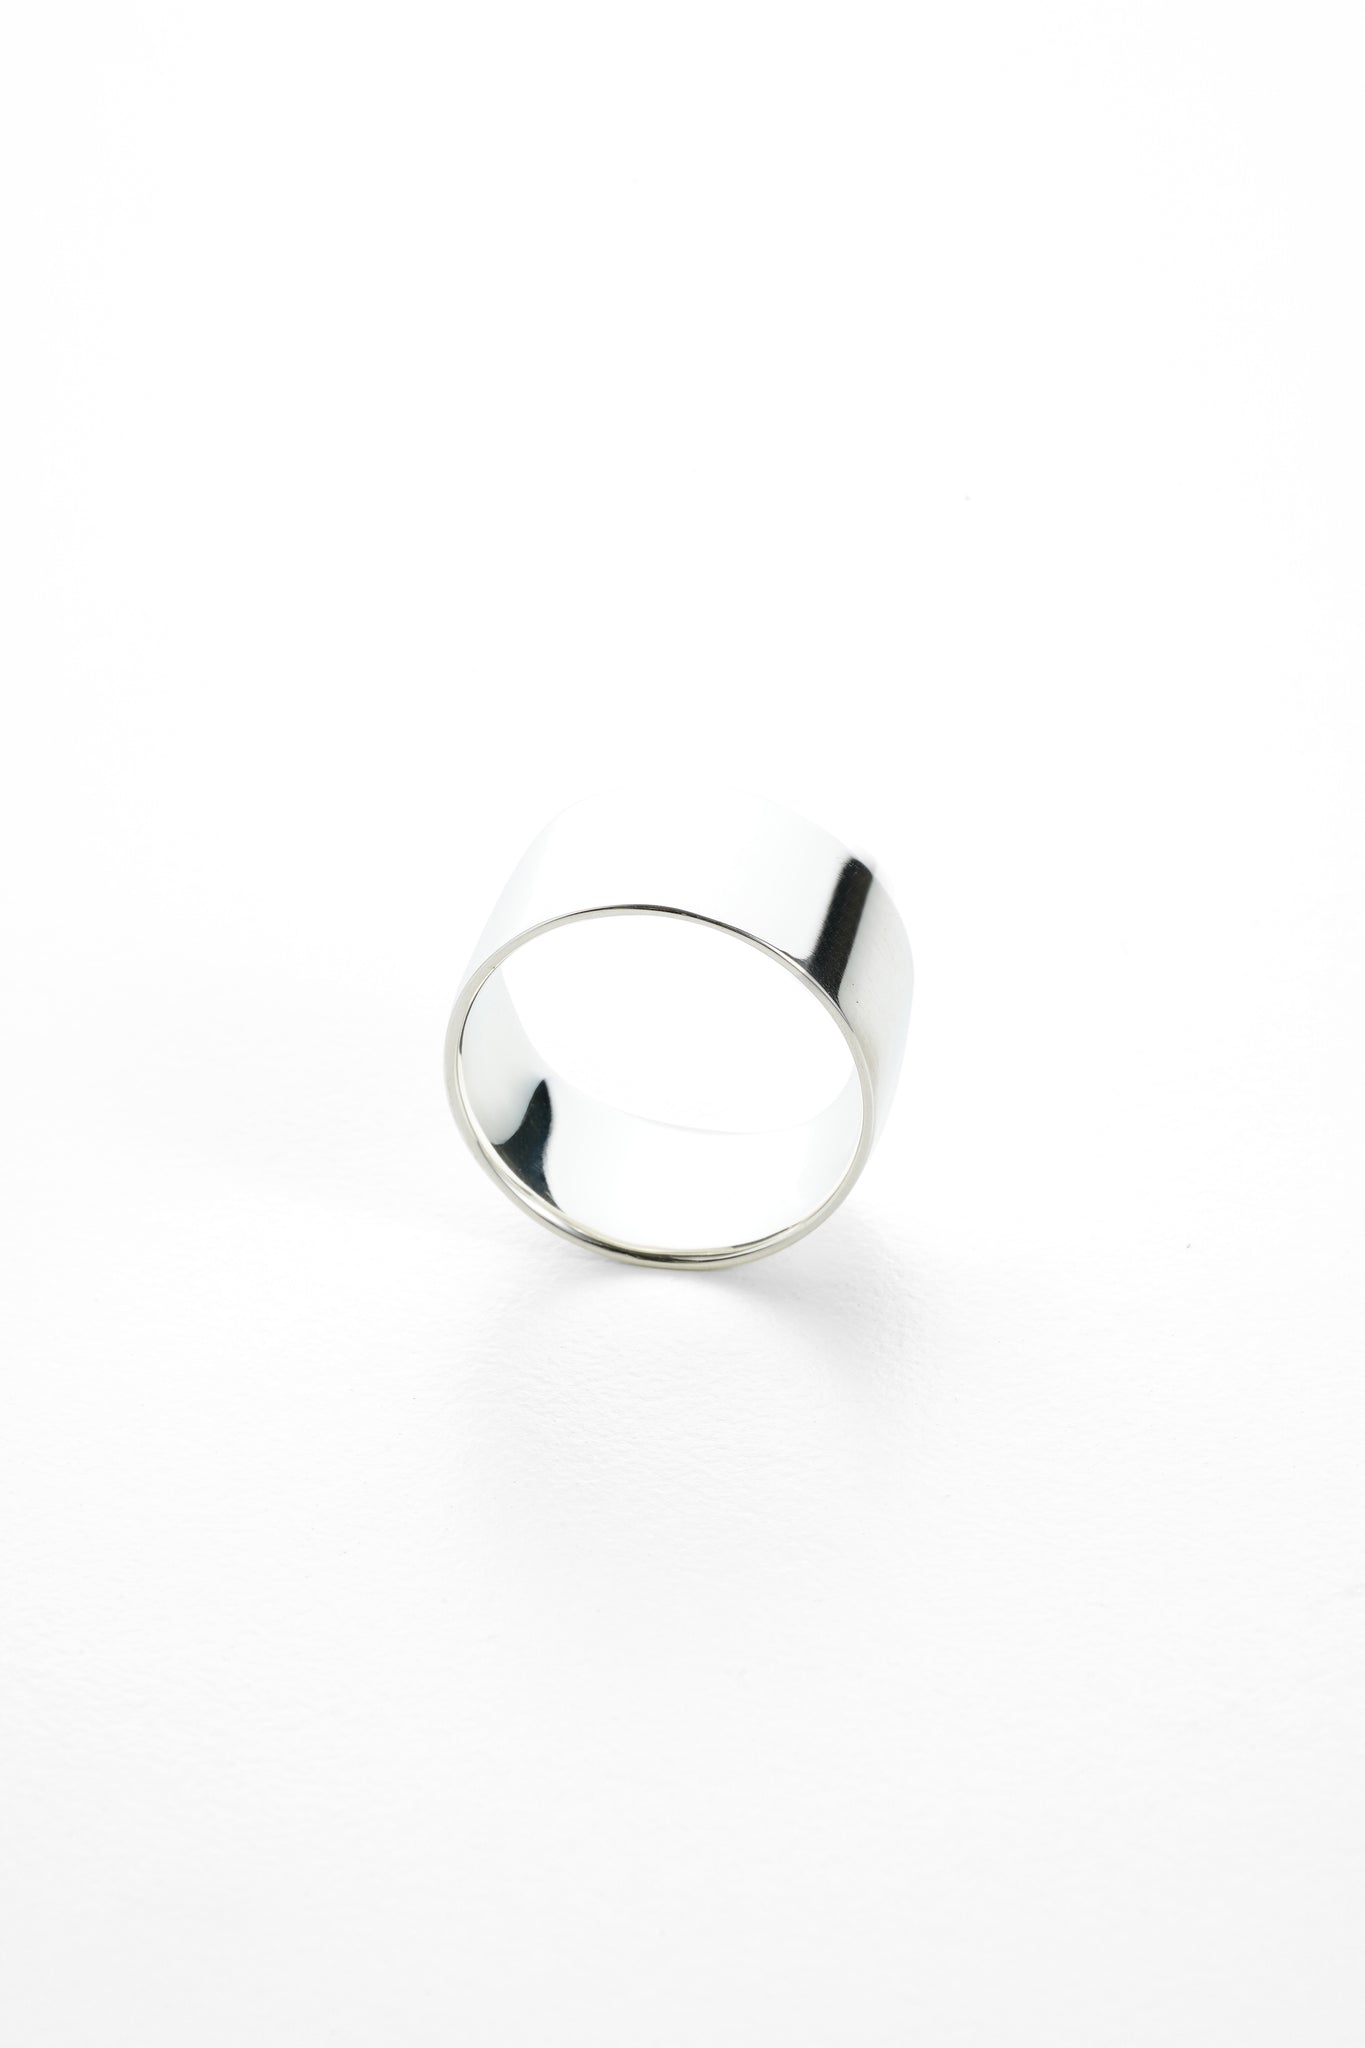 PT RING 03 (SILVER925)